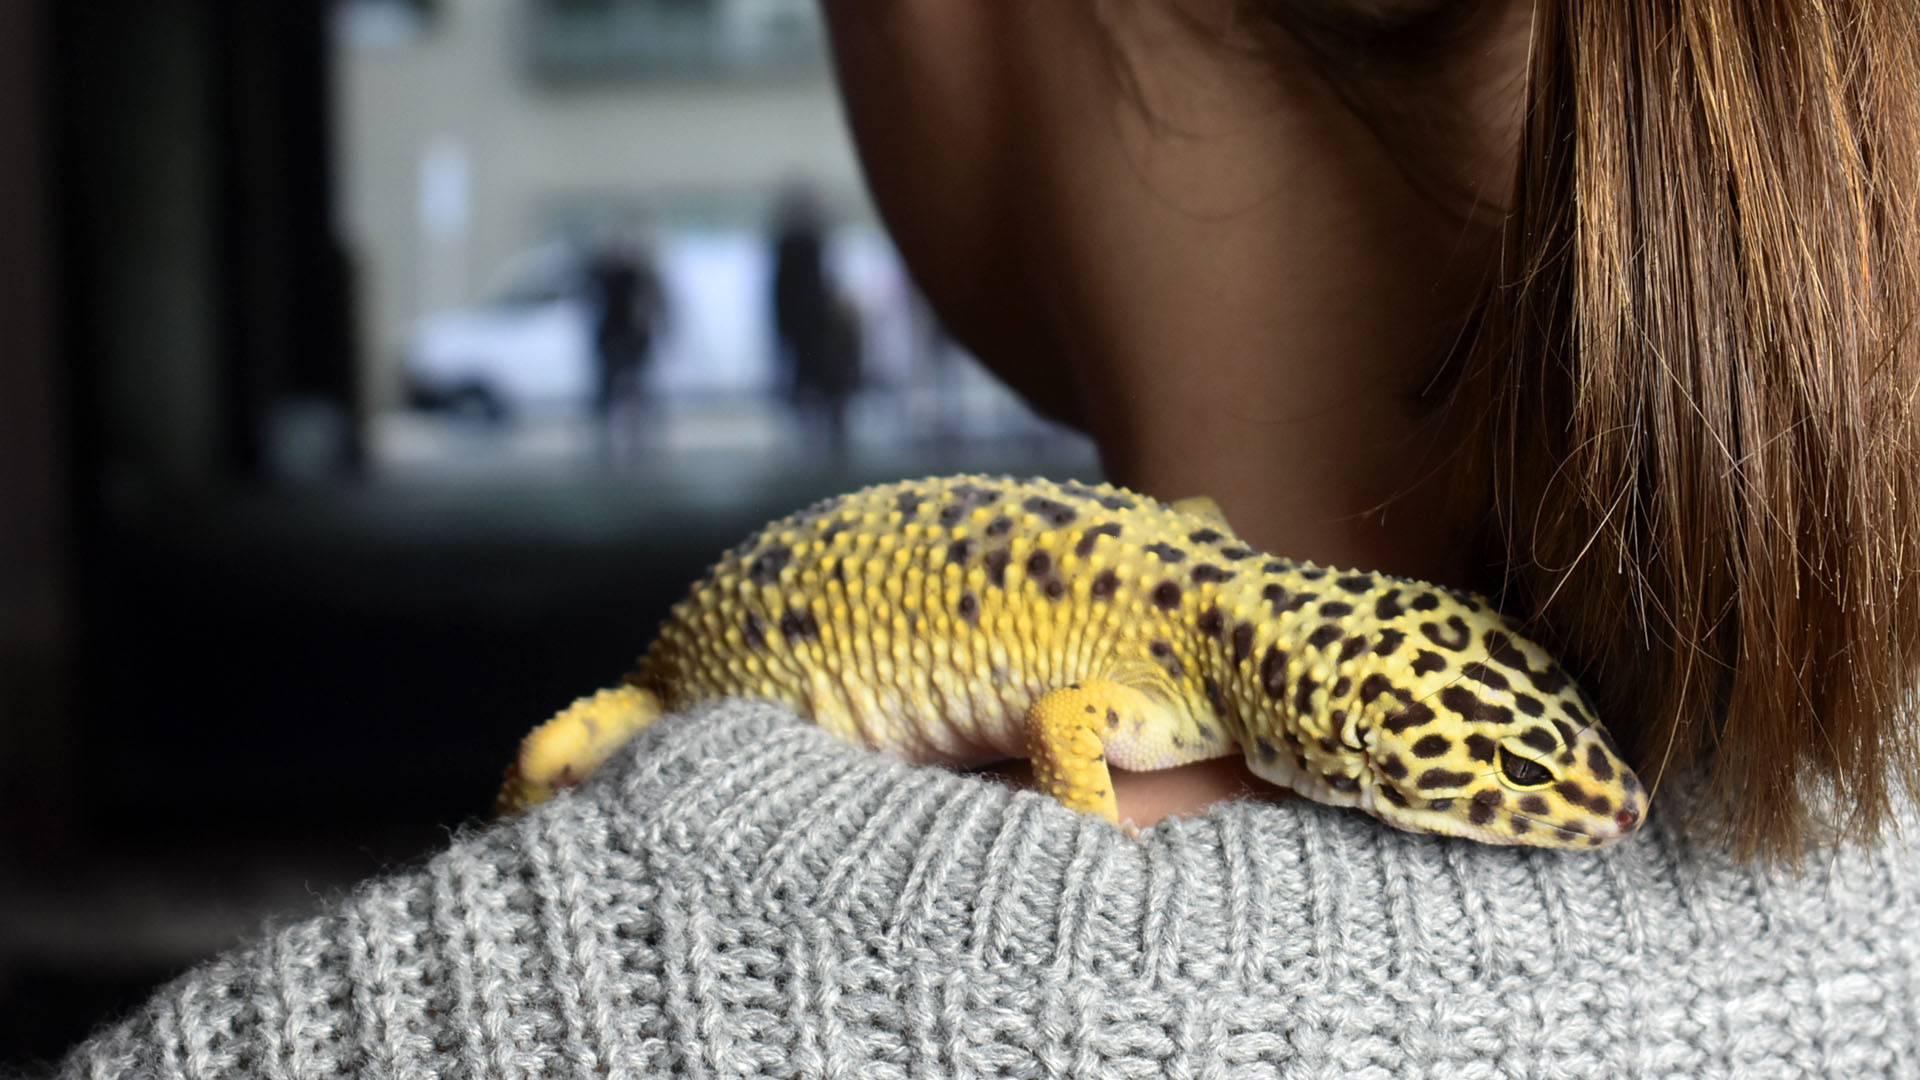 Image Titled Have Fun With Your Leopard Gecko Step - Gecko - HD Wallpaper 